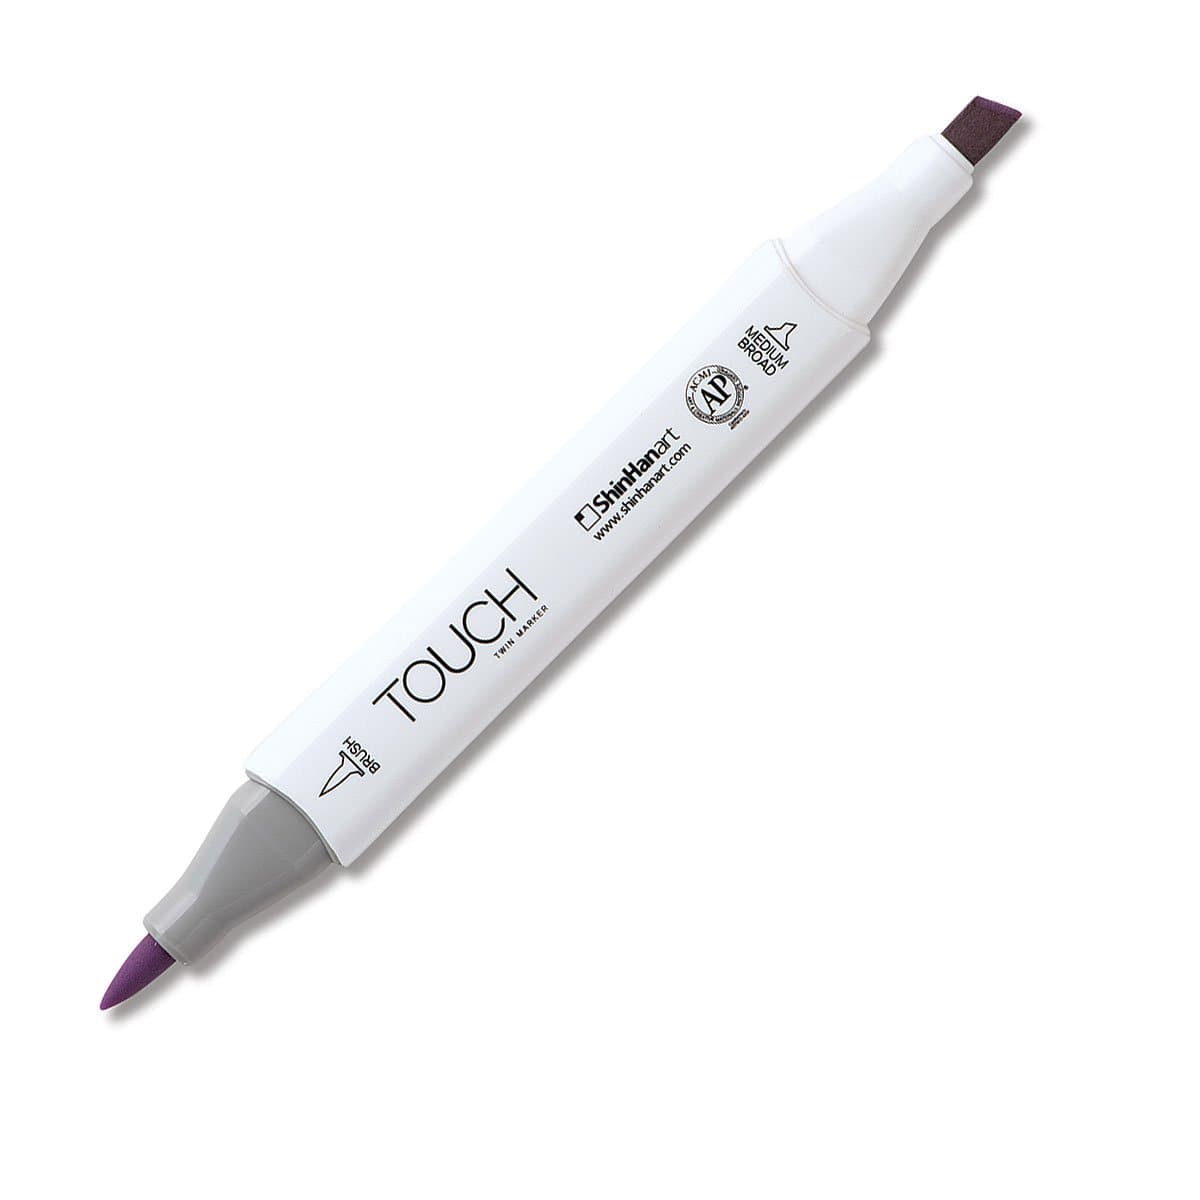 TOUCH - Marcadores gama 2 brush